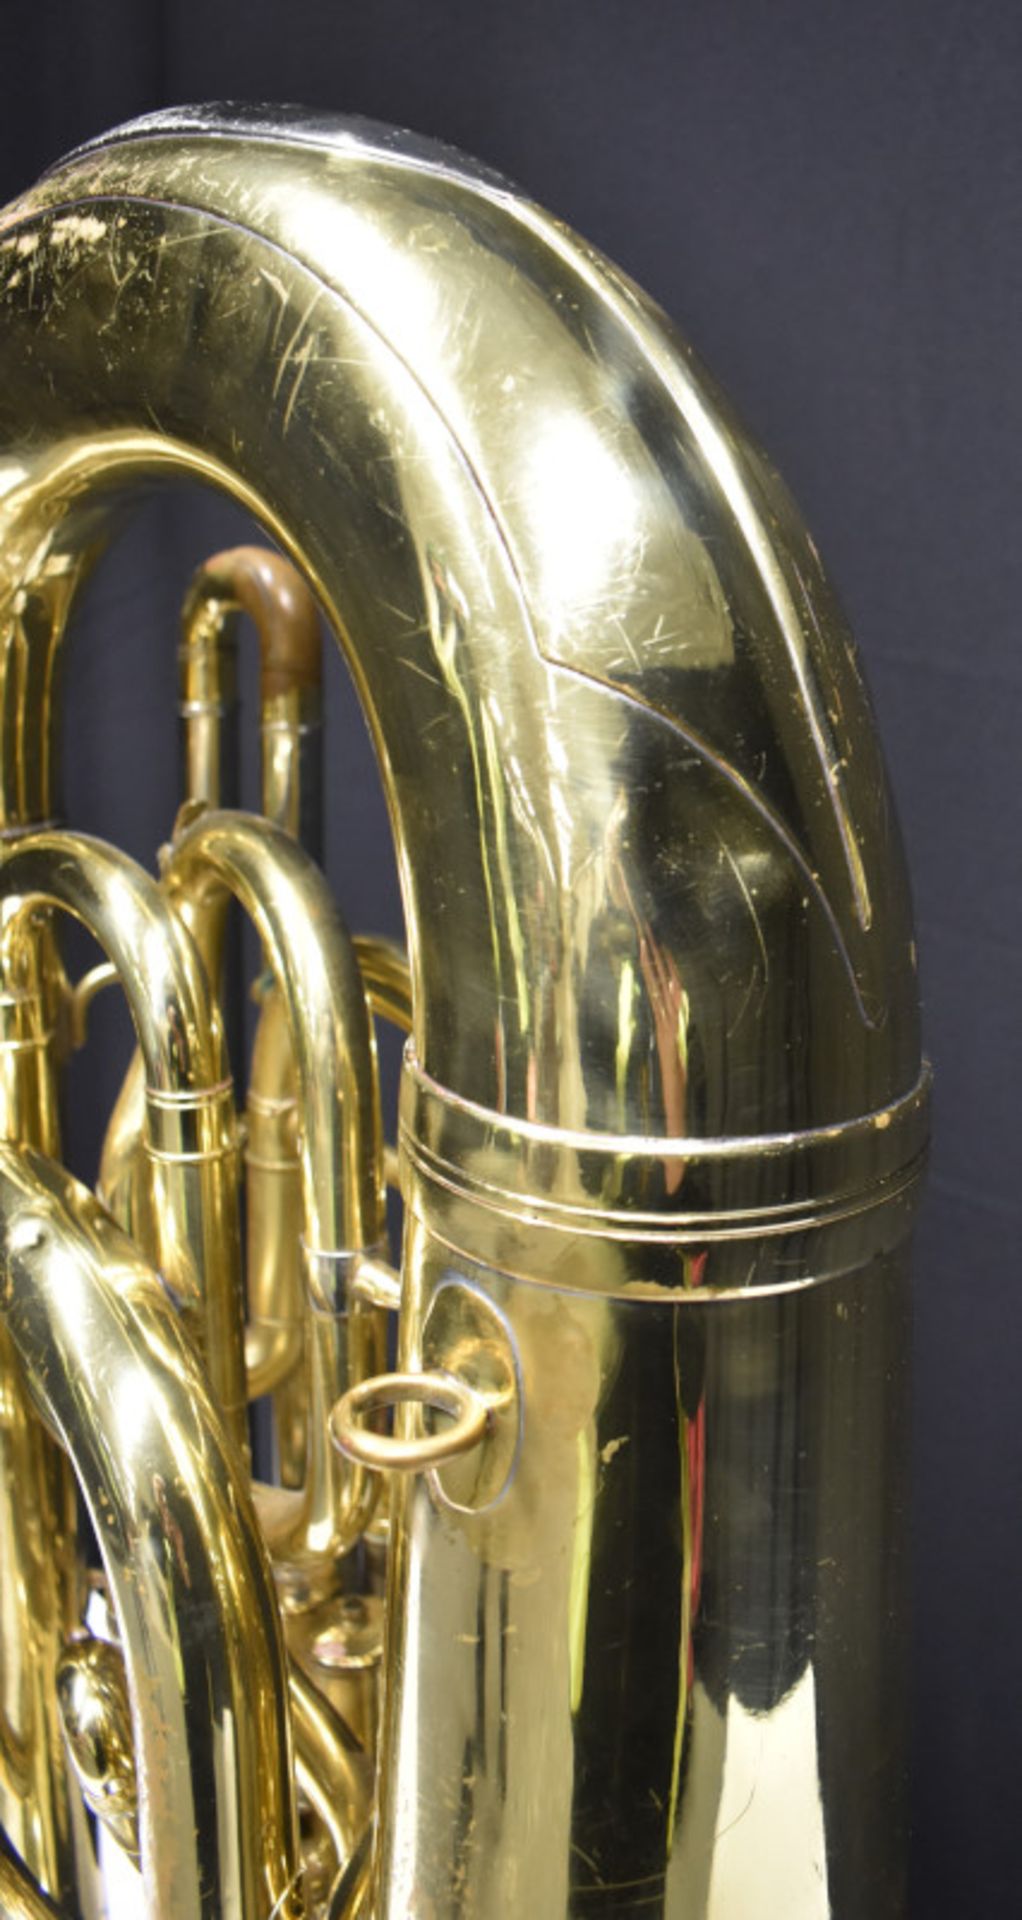 Besson Sovereign 982 Tuba (finger button stuck in place) in Besson case (missing wheel) - - Image 24 of 24